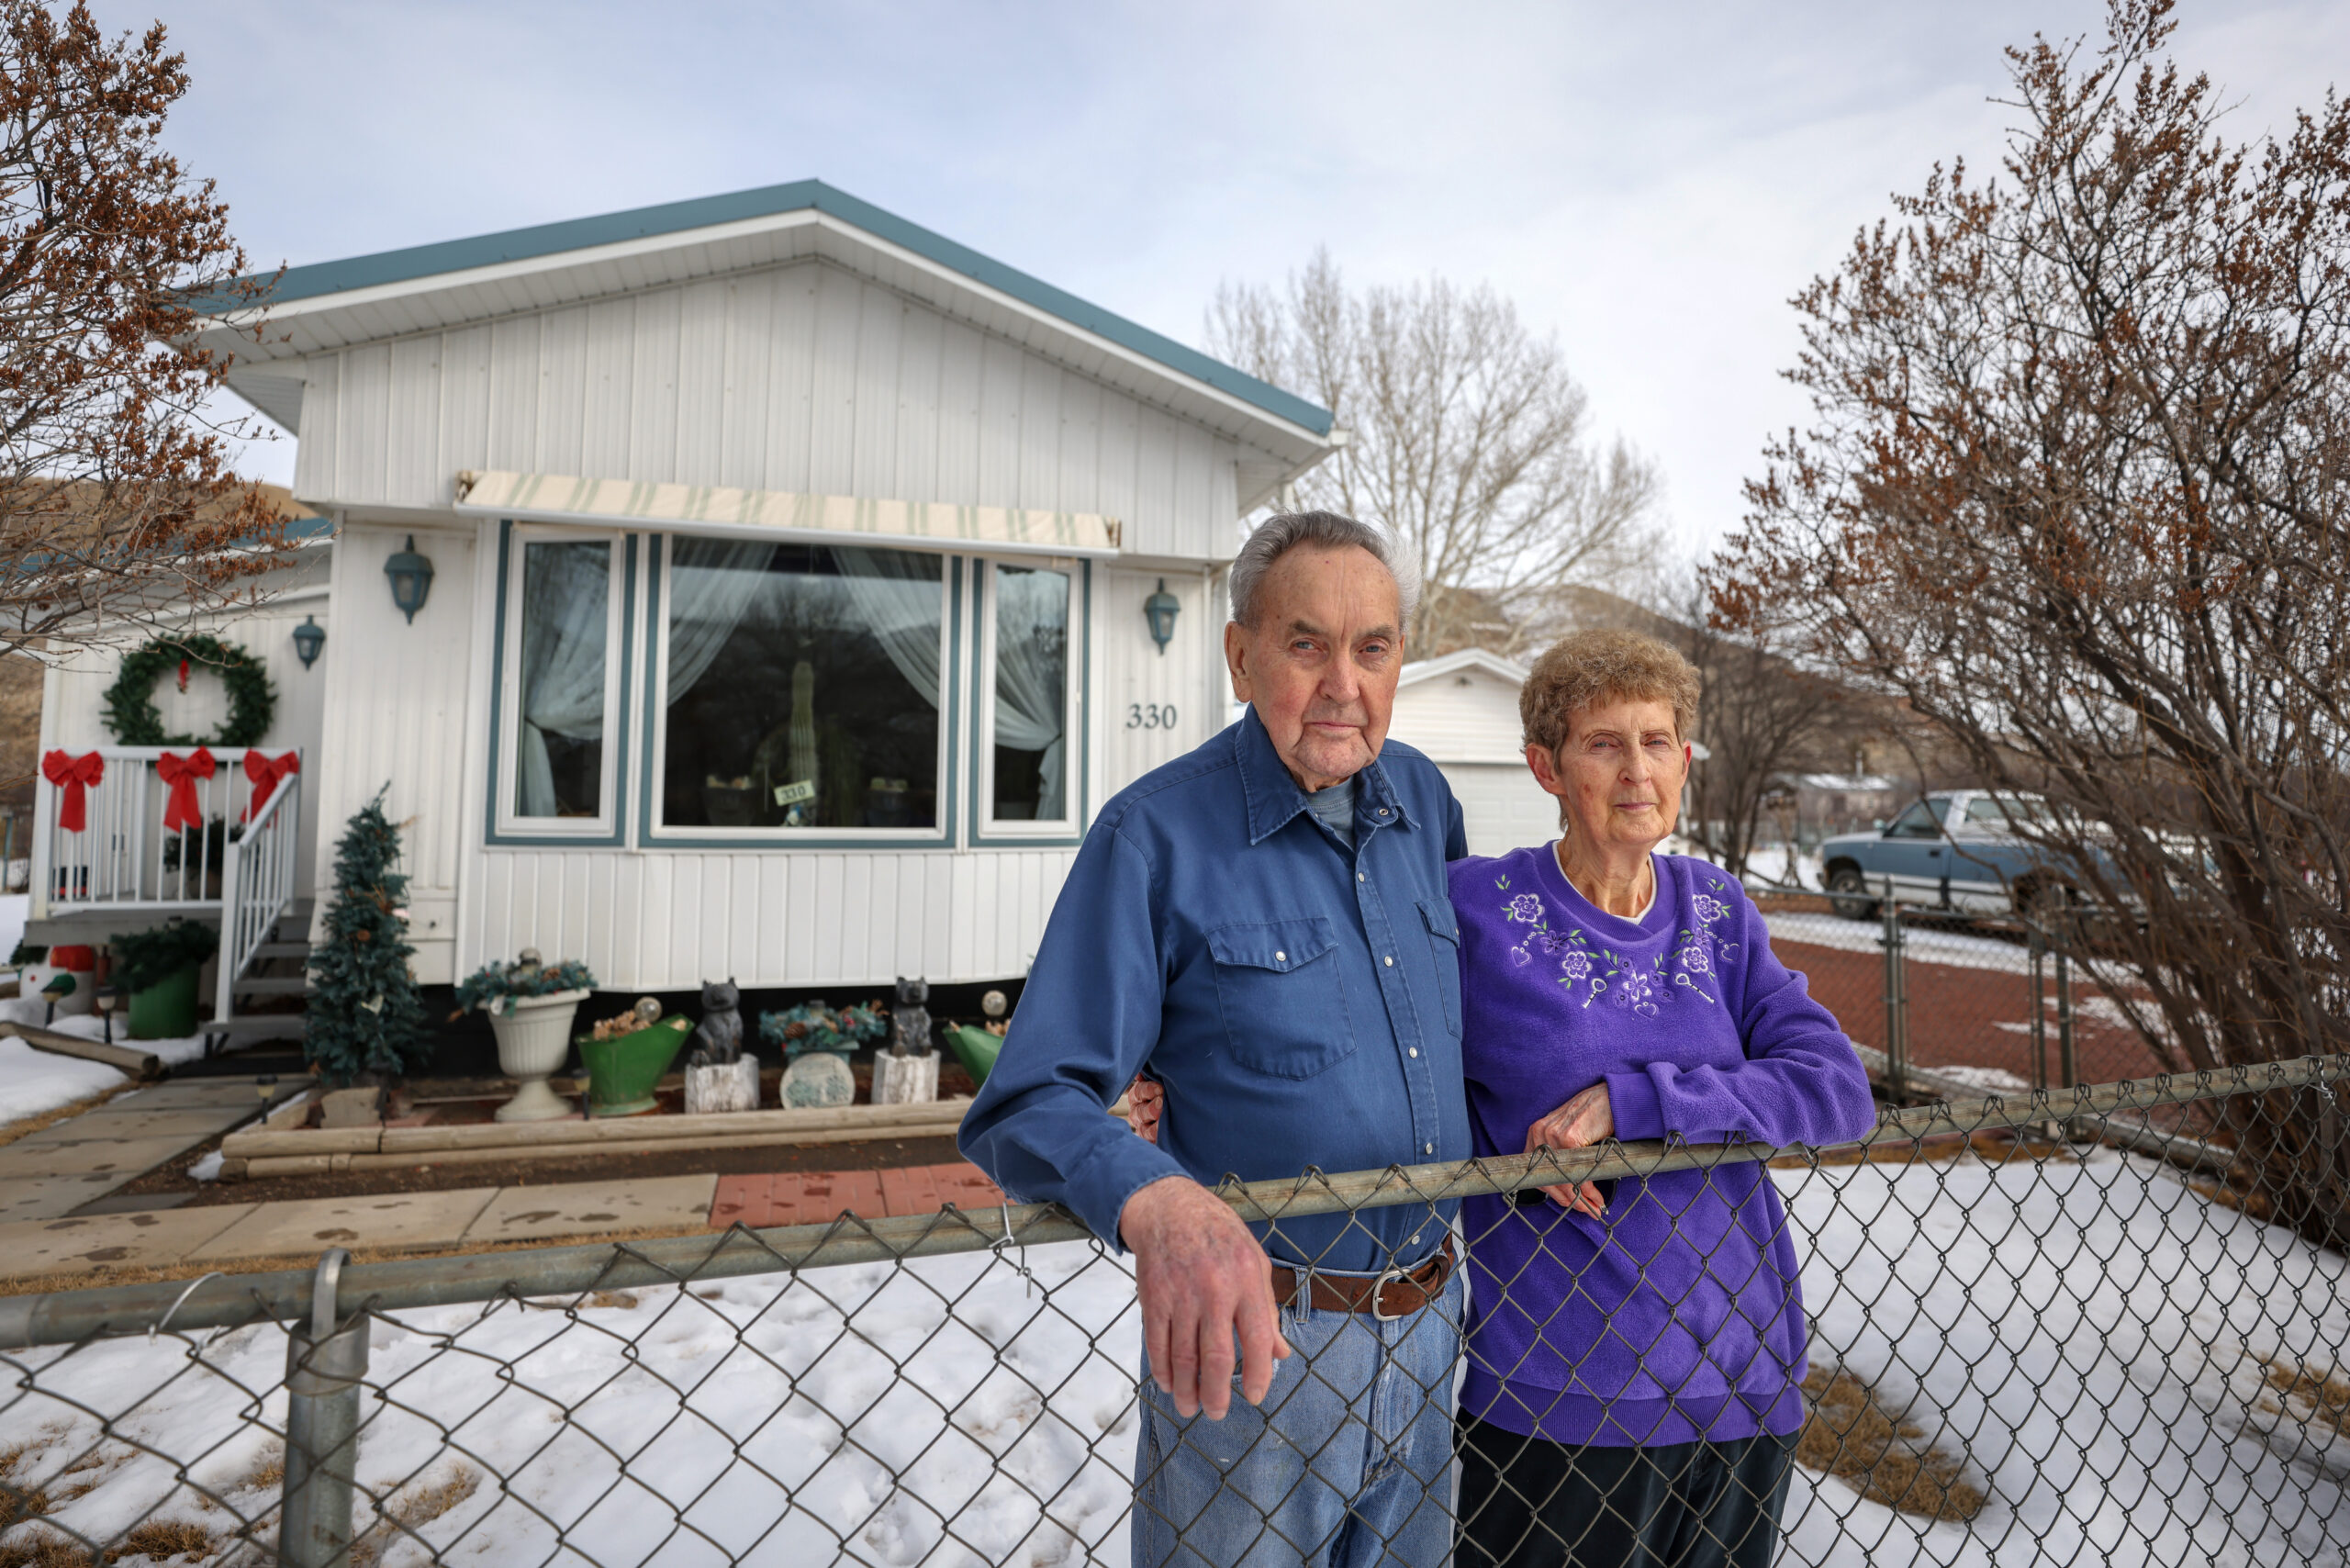 An older couple pose in front of a trailer in Lehigh, Alta